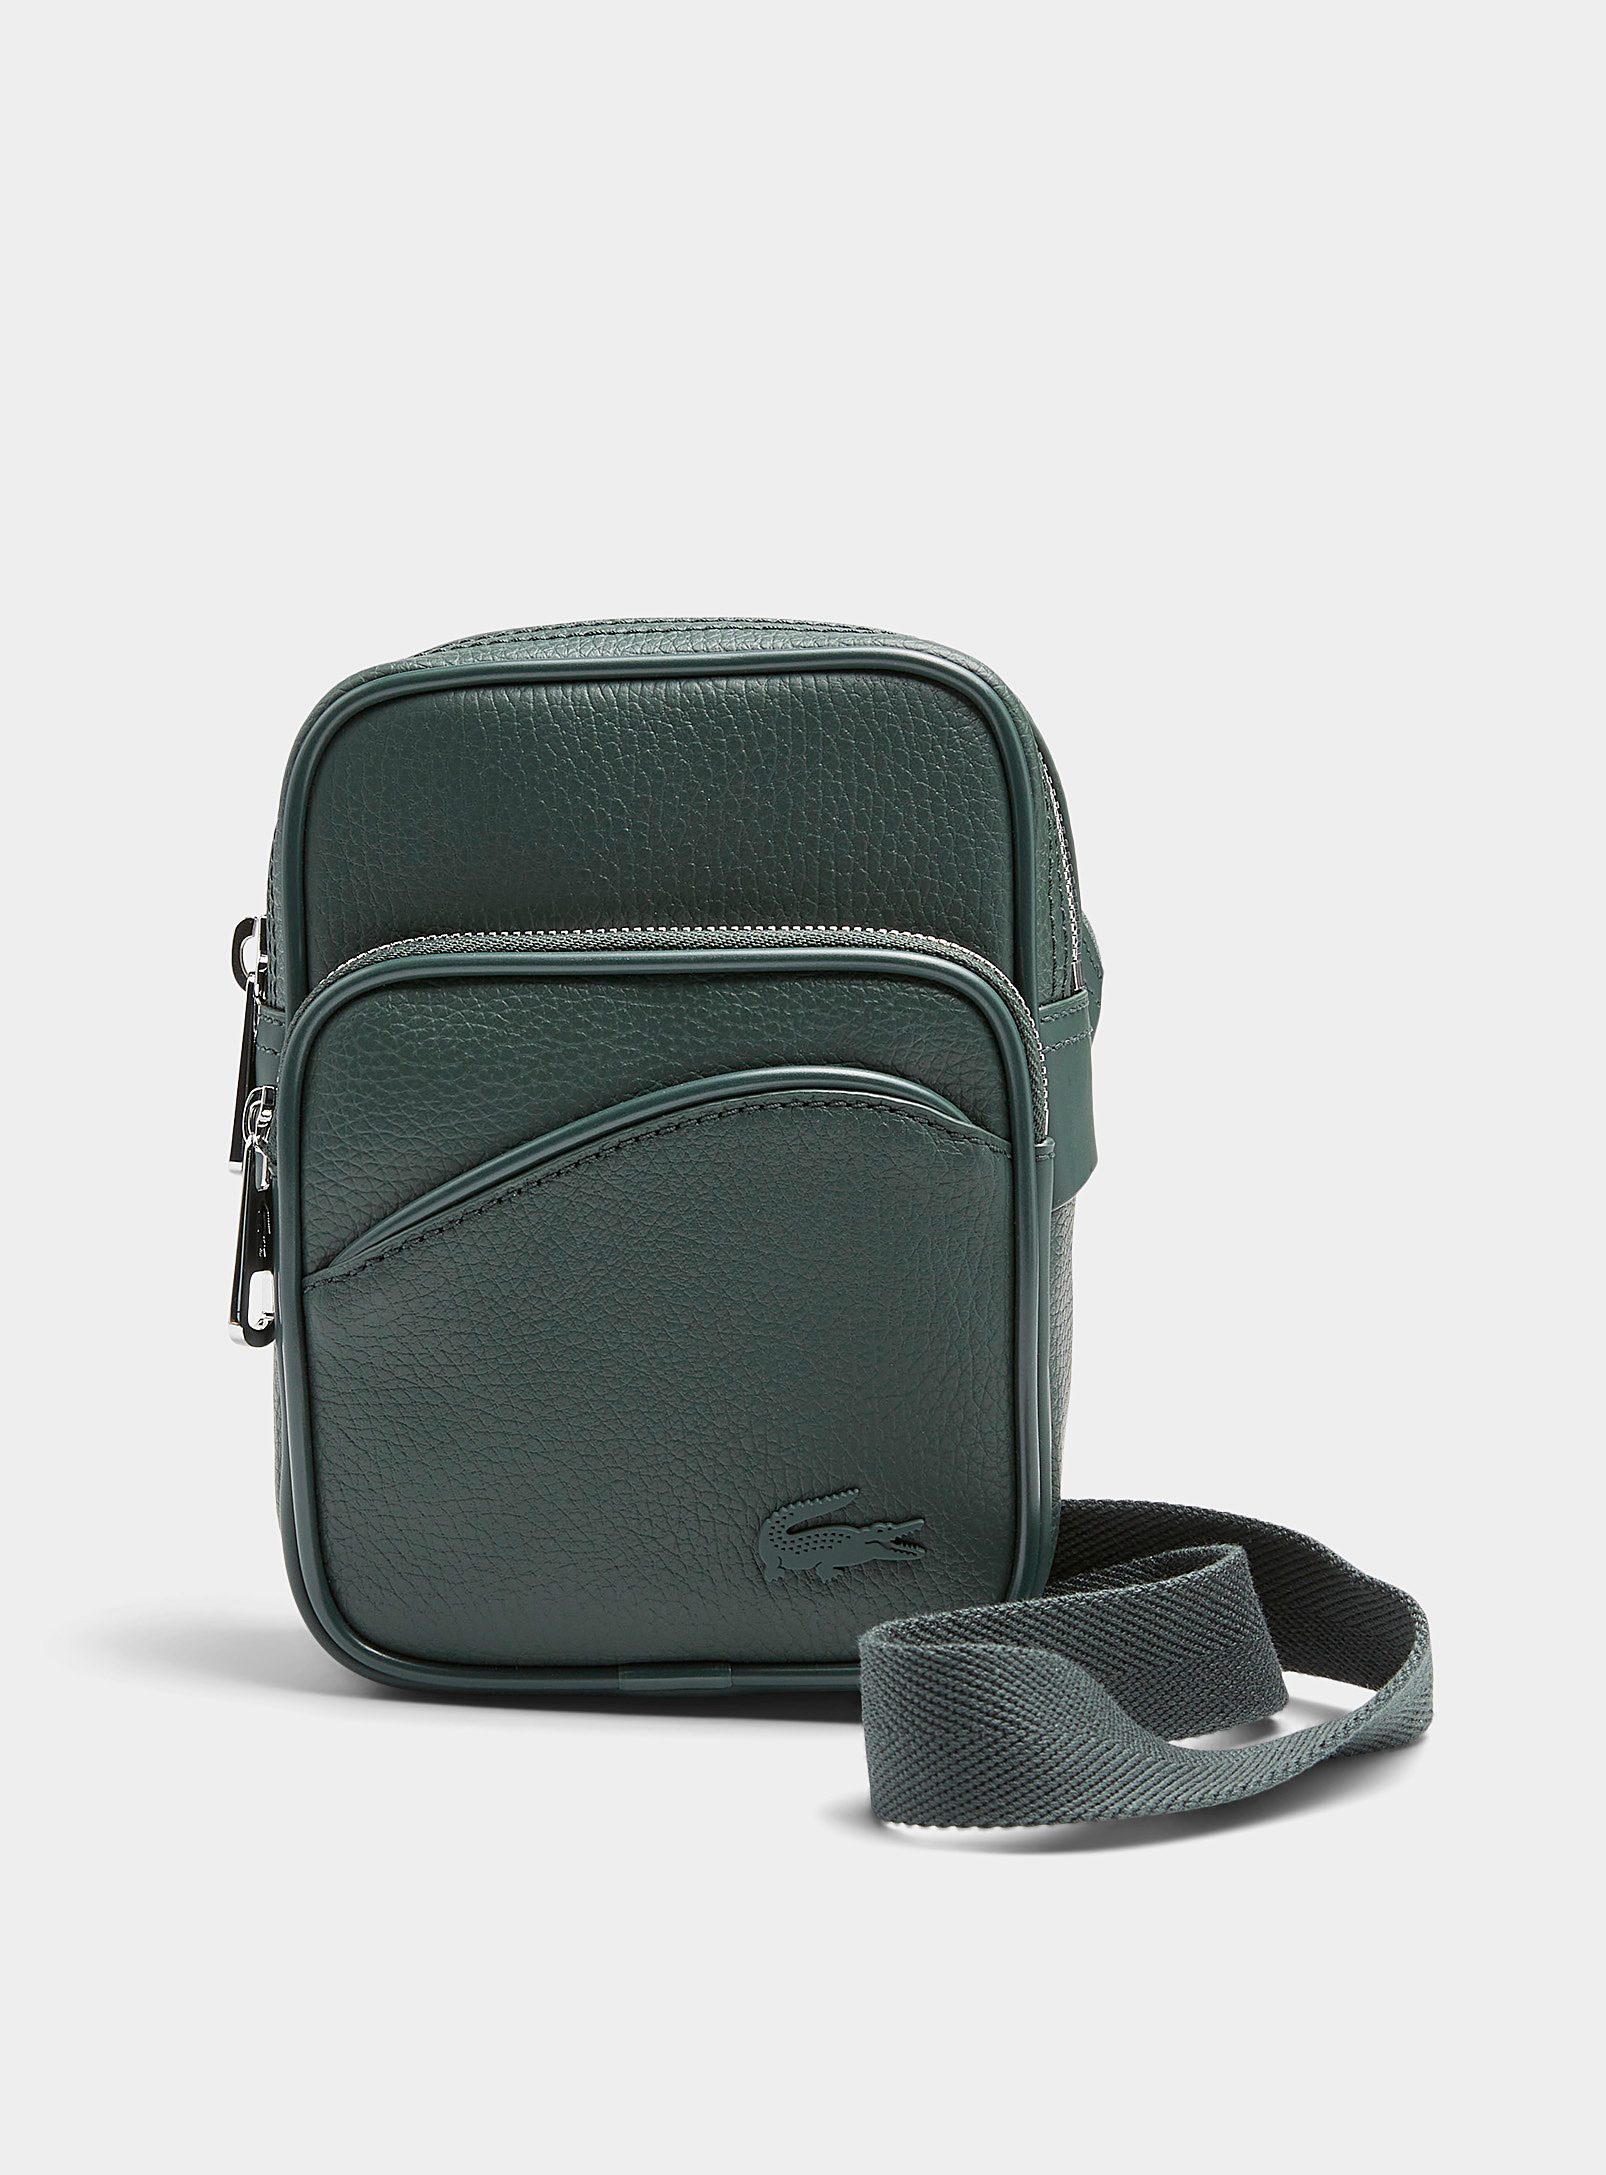 Lacoste Small Monochrome Shoulder Bag In Emerald/kelly Green